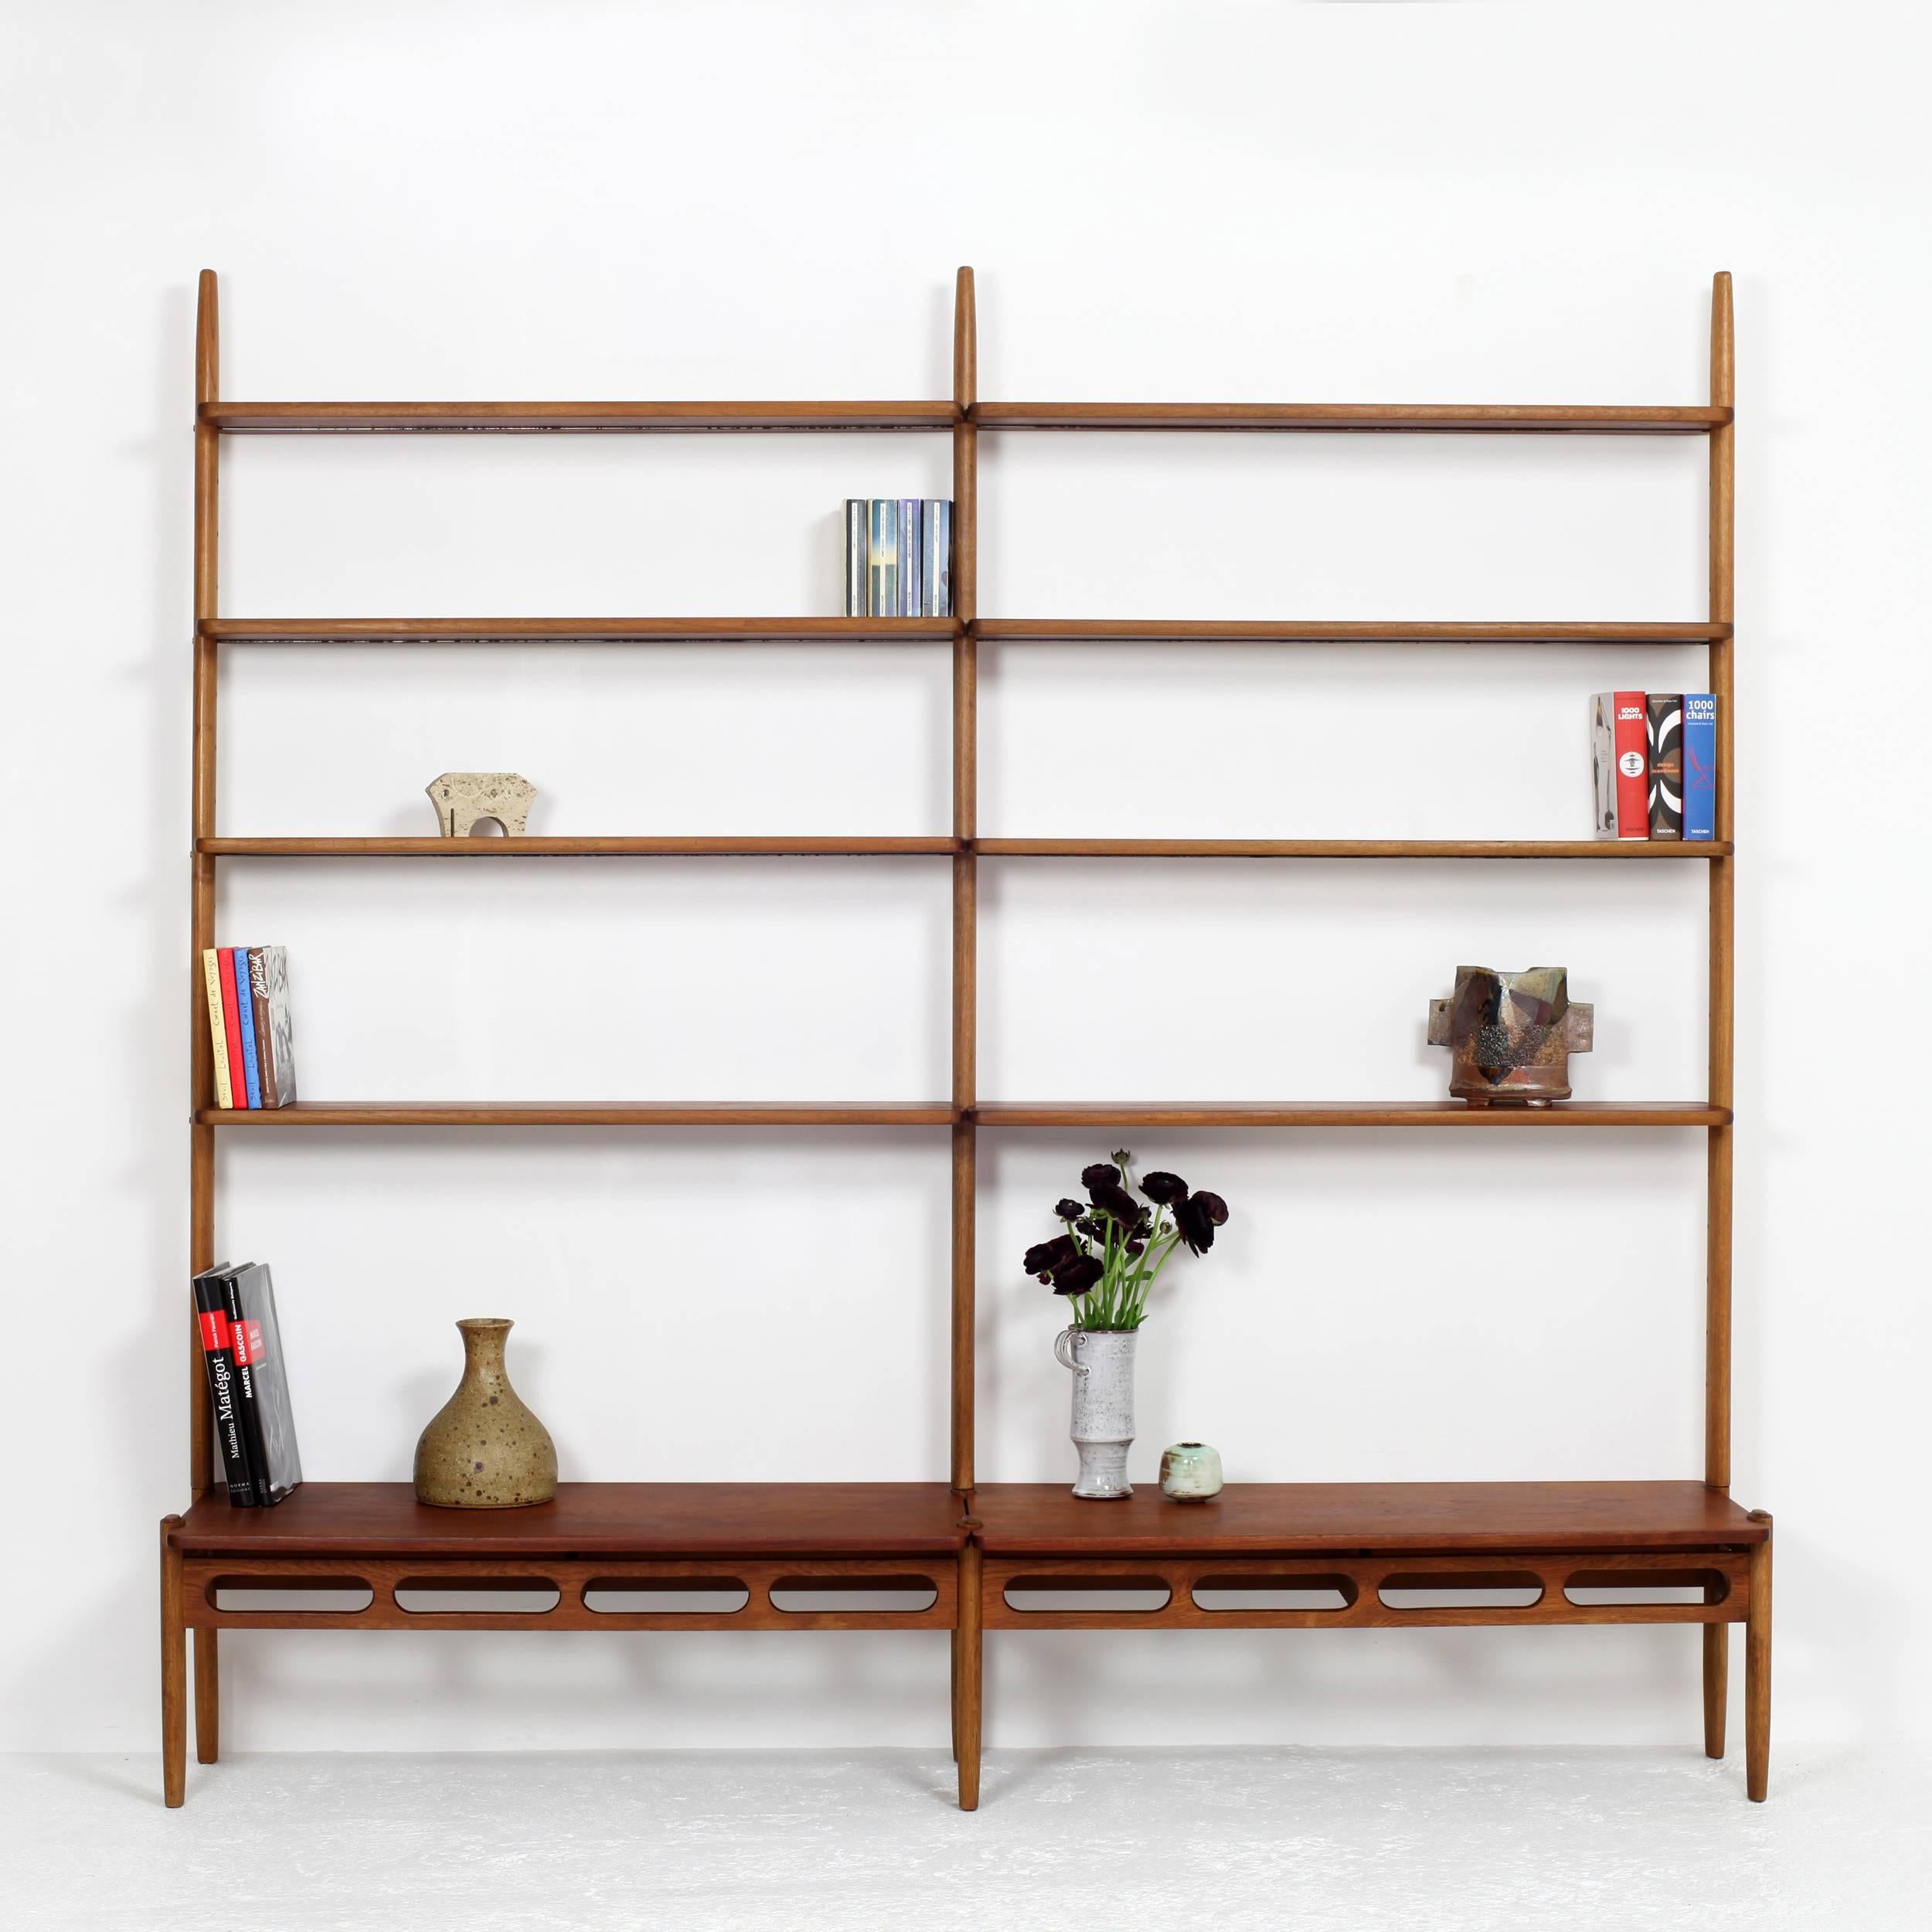 Light and aerial shaped modular bookshelves in teak and oak designed by William Watting for A/S Mikael Laursen, 1950, Denmark.